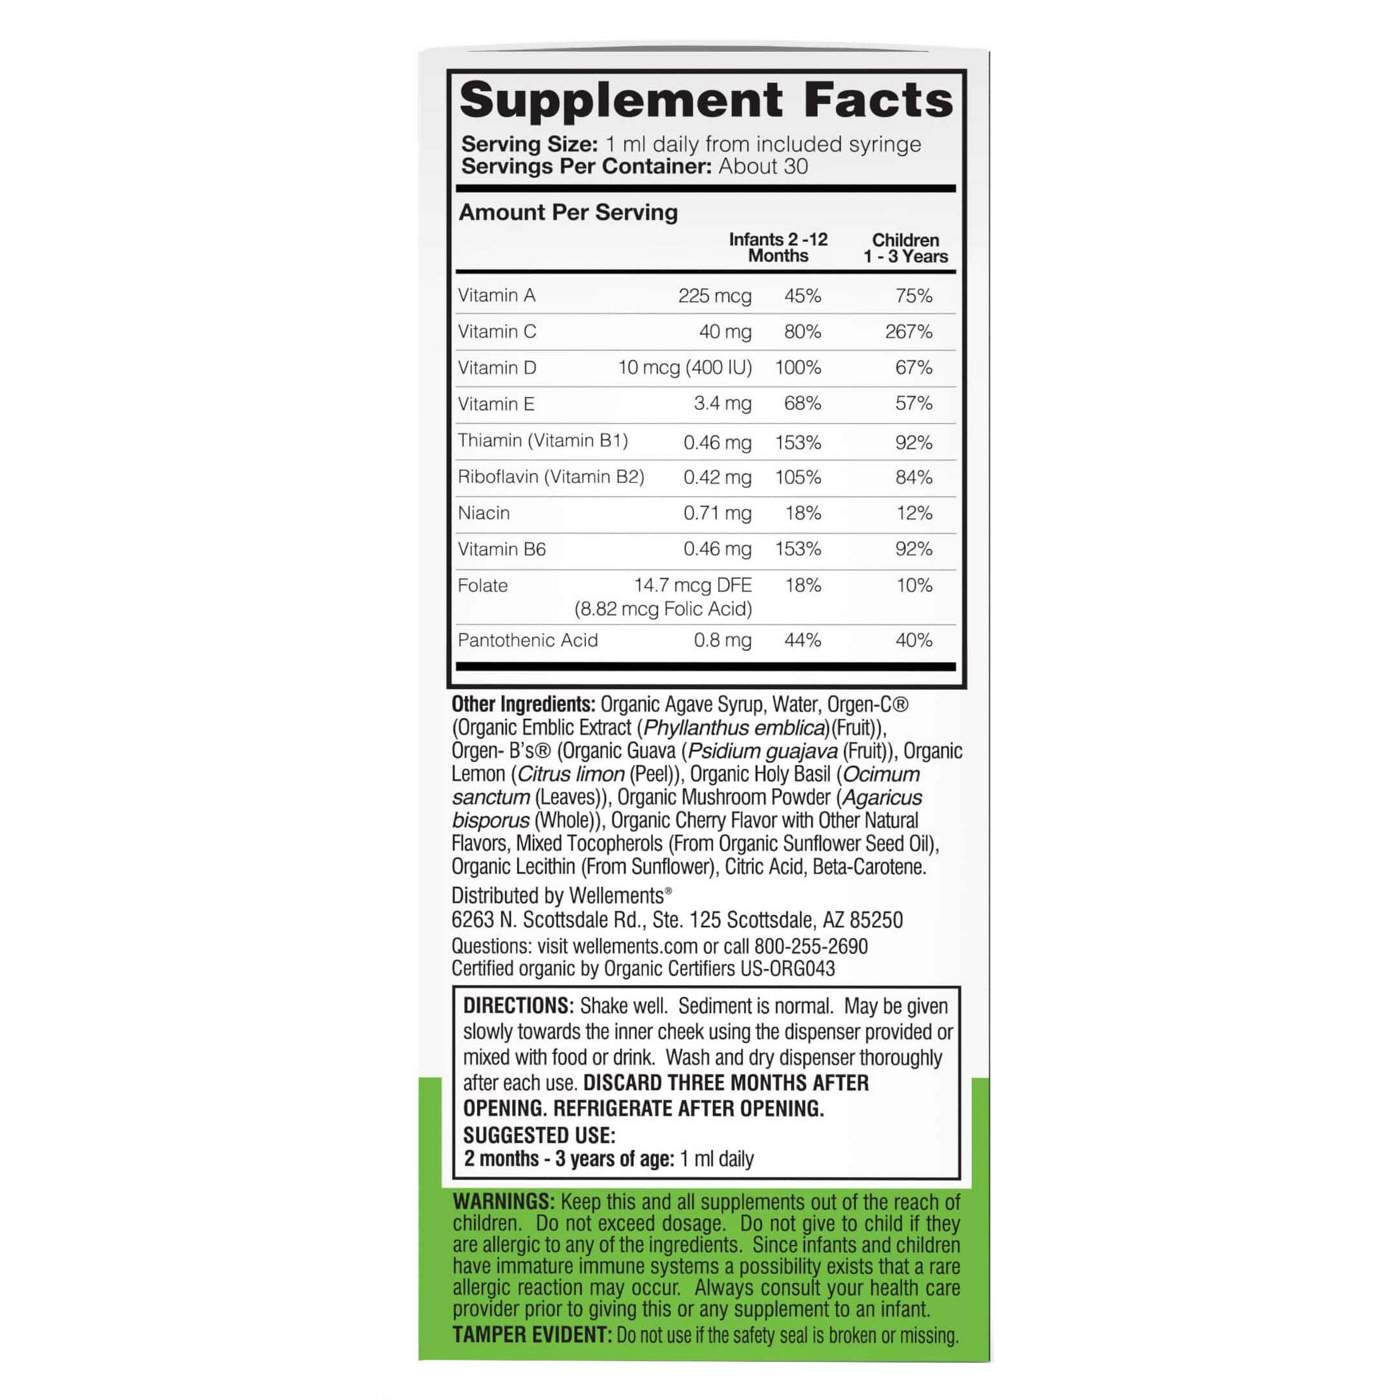 Wellements Organic Multivitamin Drops; image 2 of 2